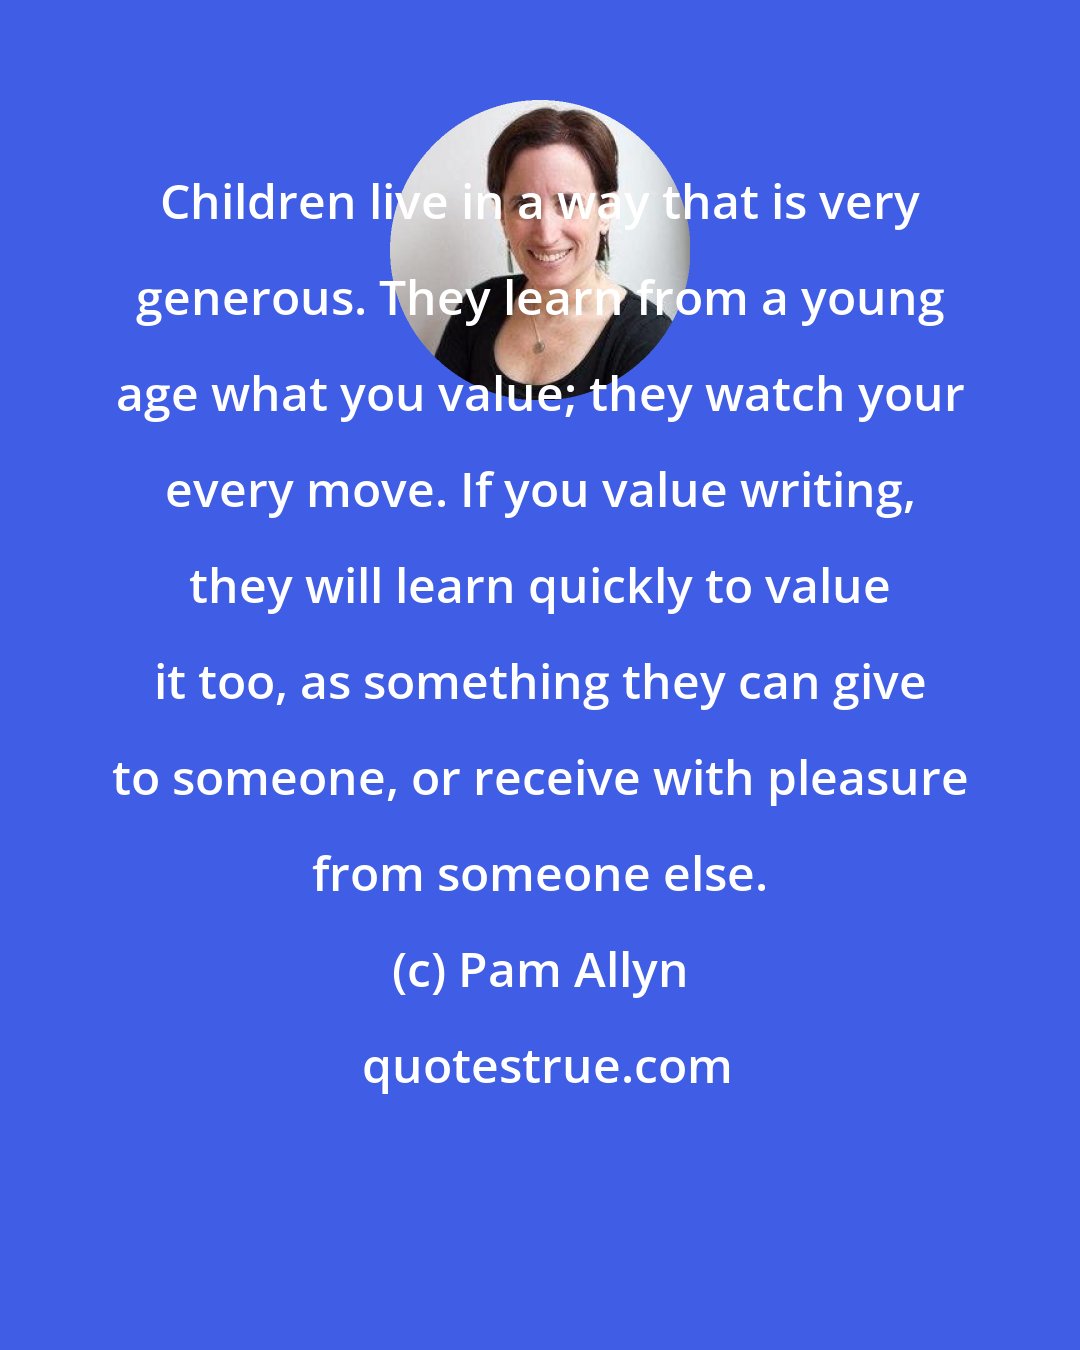 Pam Allyn: Children live in a way that is very generous. They learn from a young age what you value; they watch your every move. If you value writing, they will learn quickly to value it too, as something they can give to someone, or receive with pleasure from someone else.